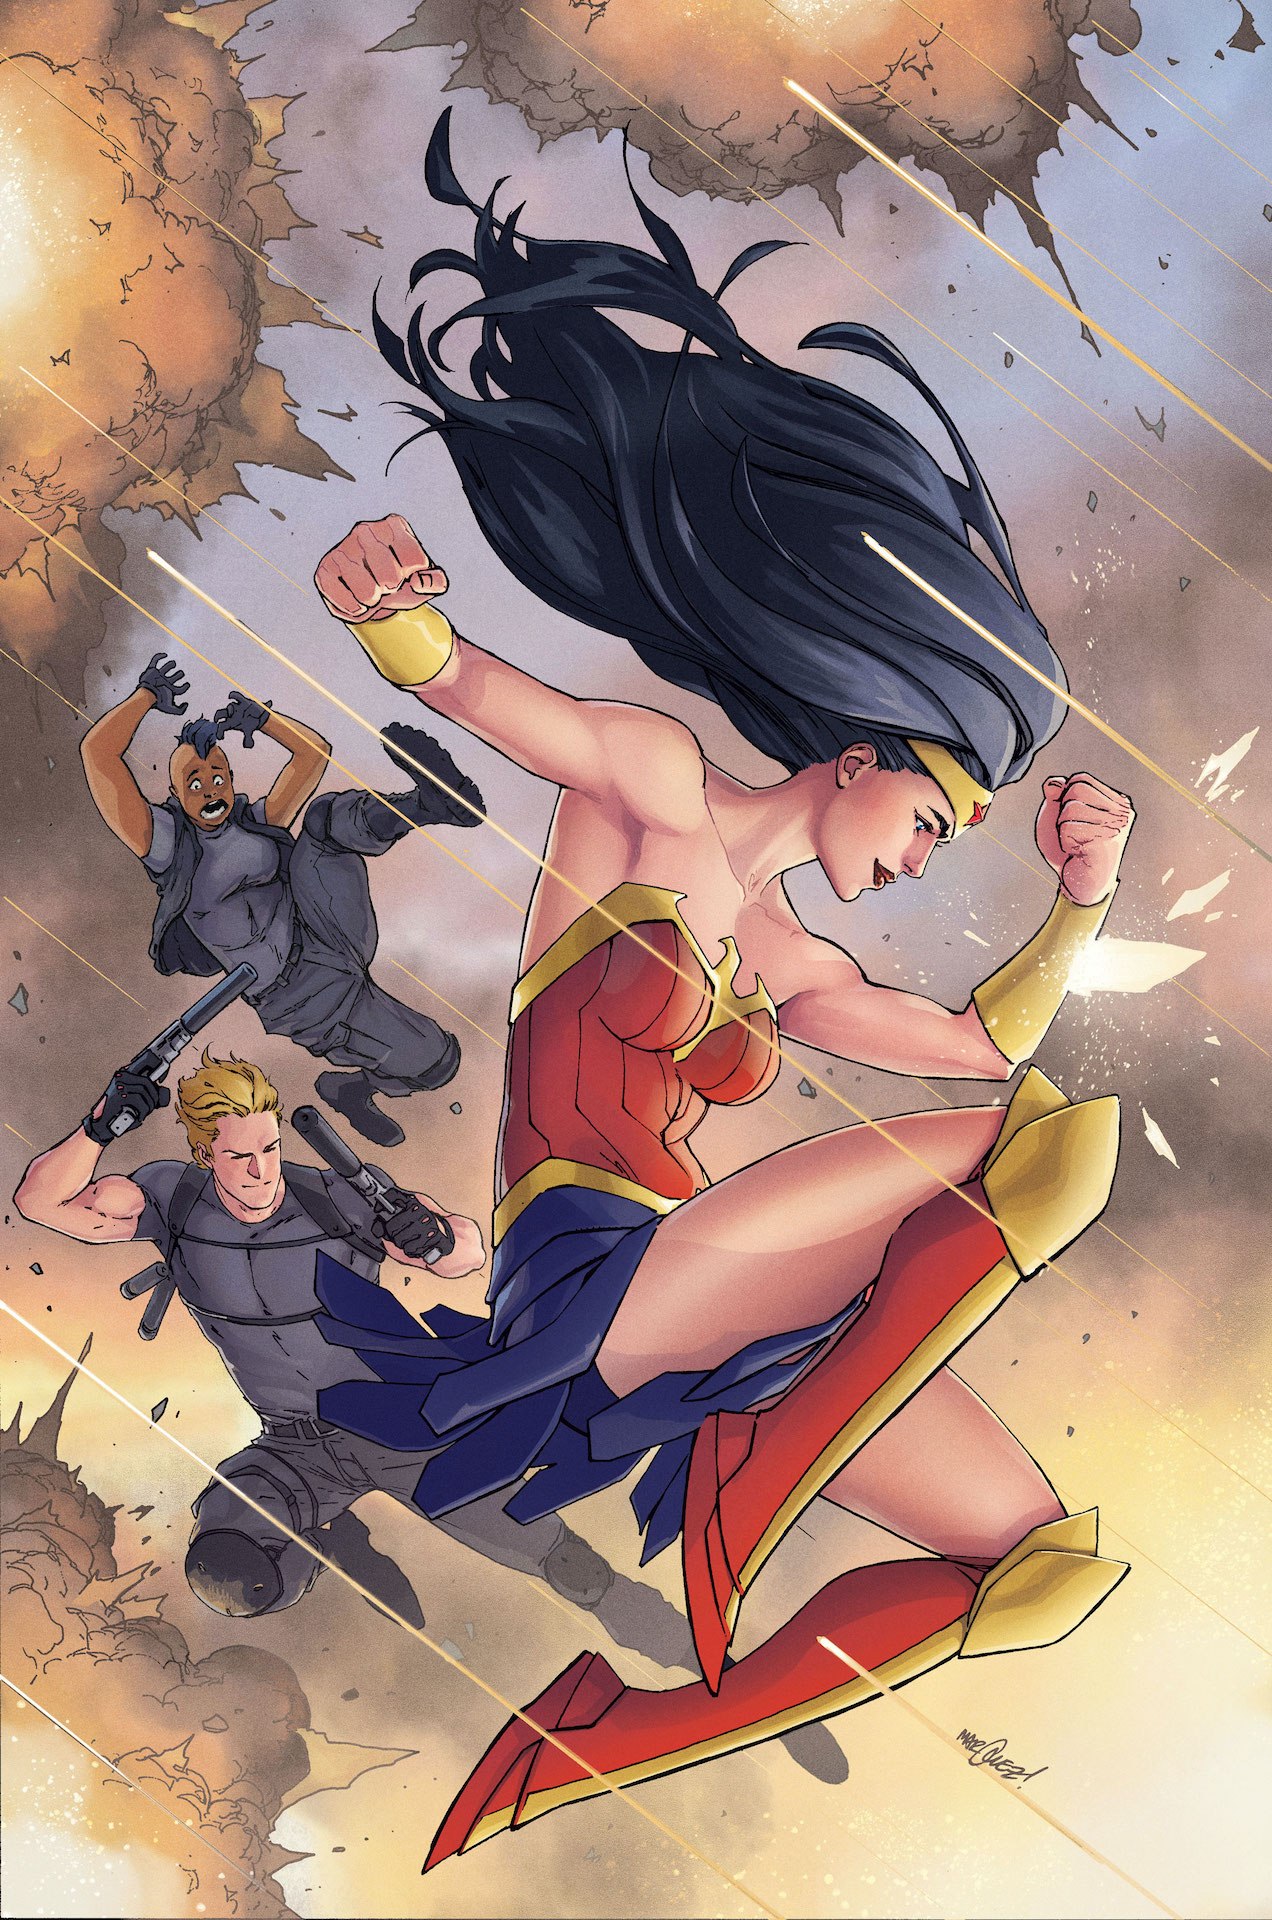 Normal cover for Wonder Woman #759. Photo: DC Comics